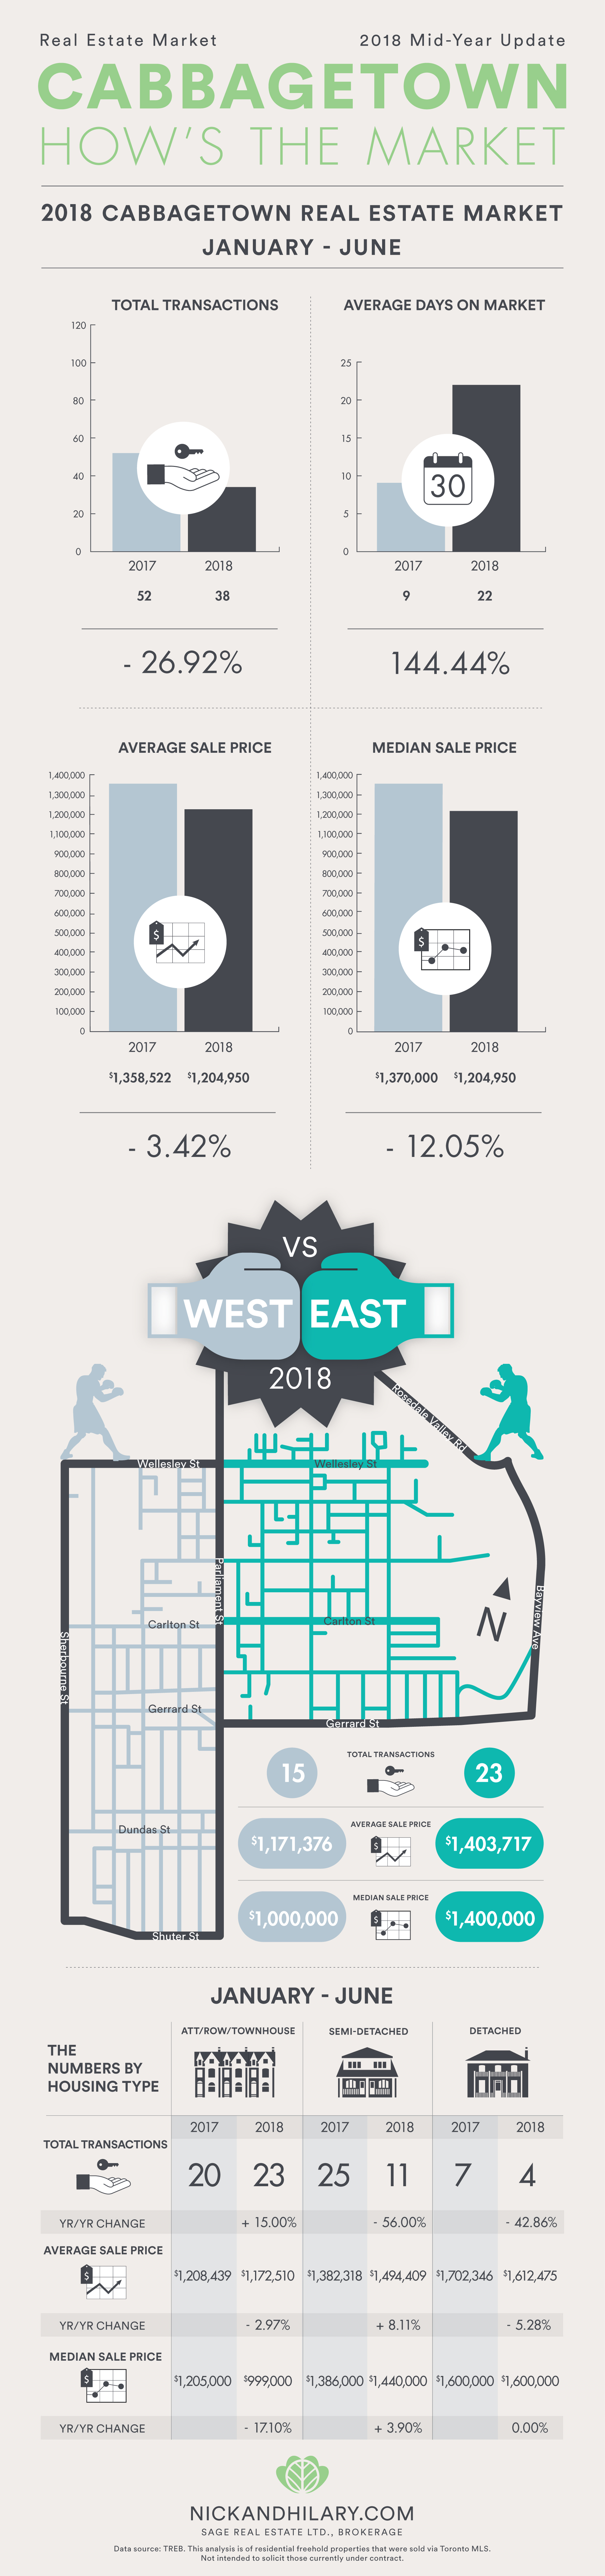 Cabbagetown_infograph_MidYearInReview2018-2